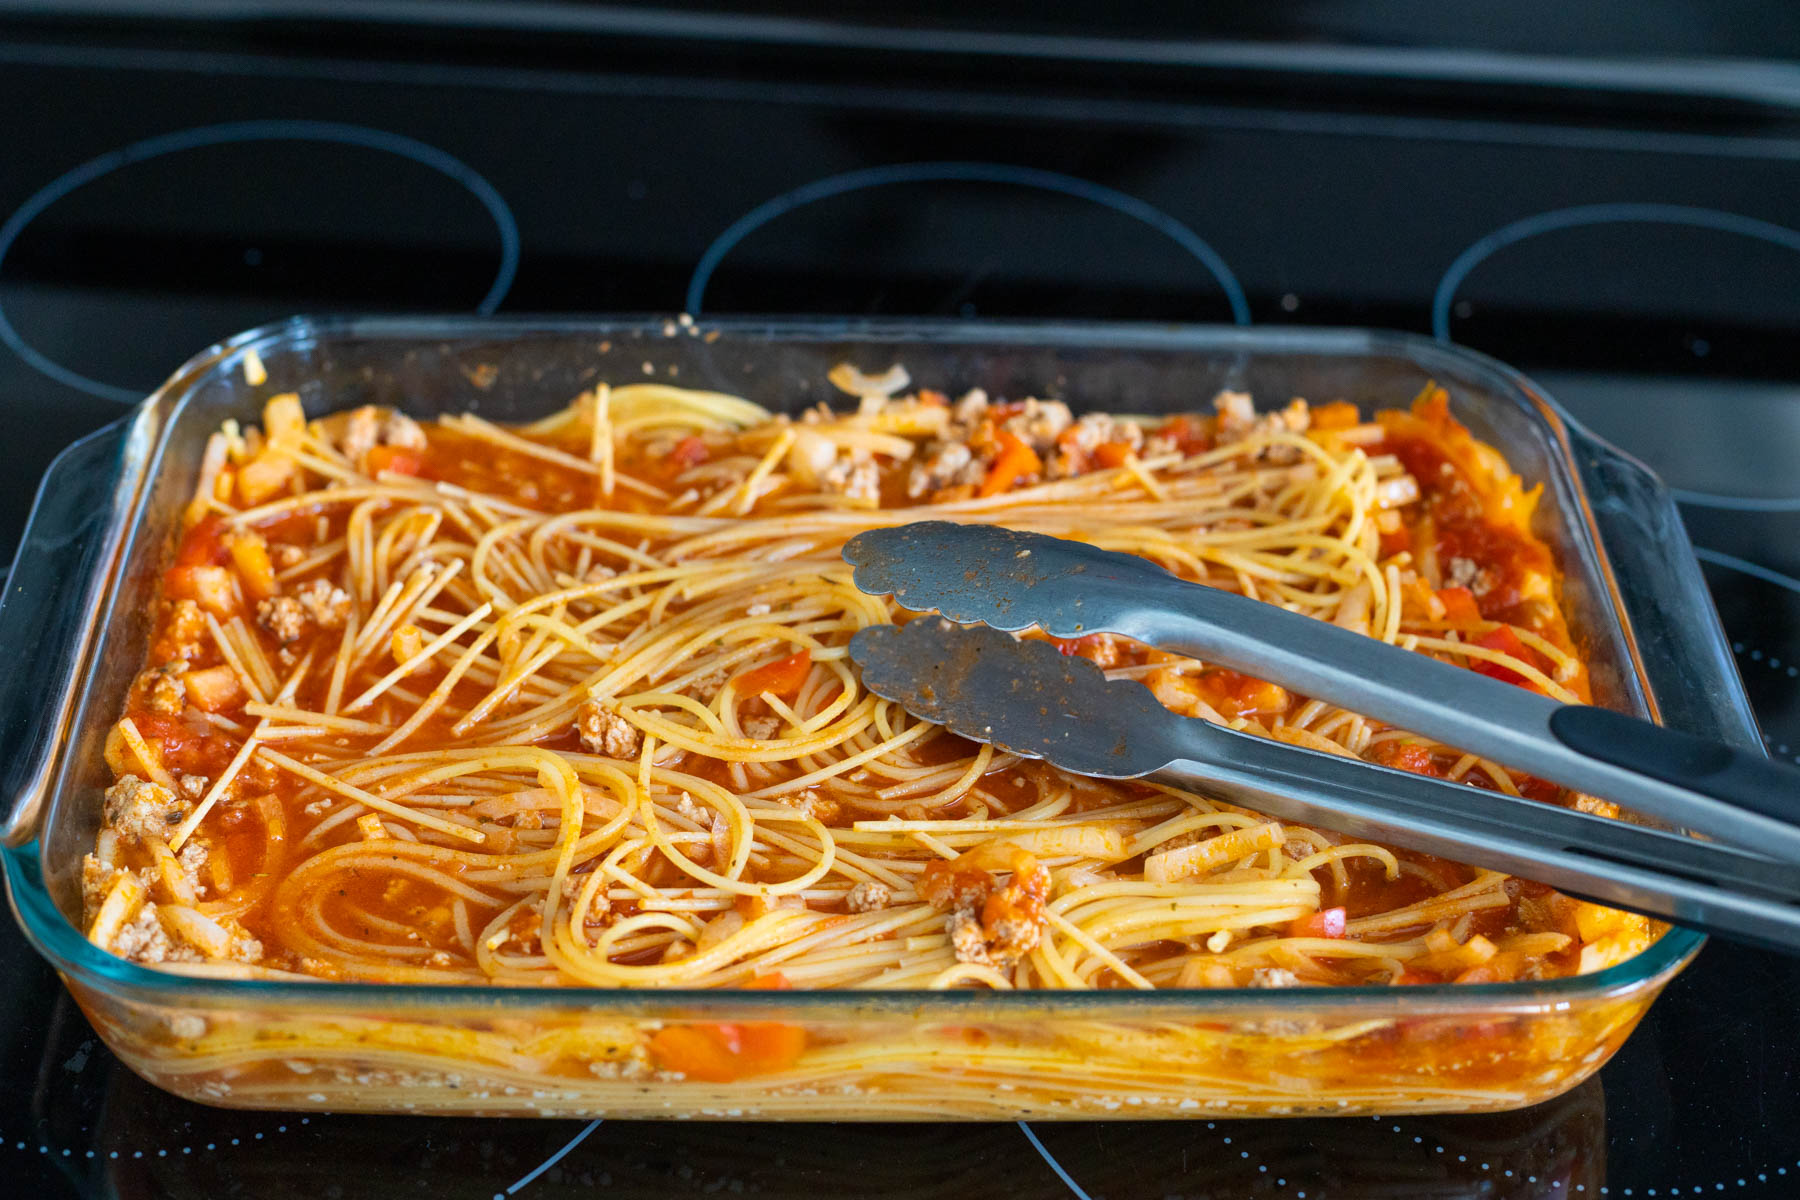 The tongs have just finished turning the spaghetti in the baking dish.